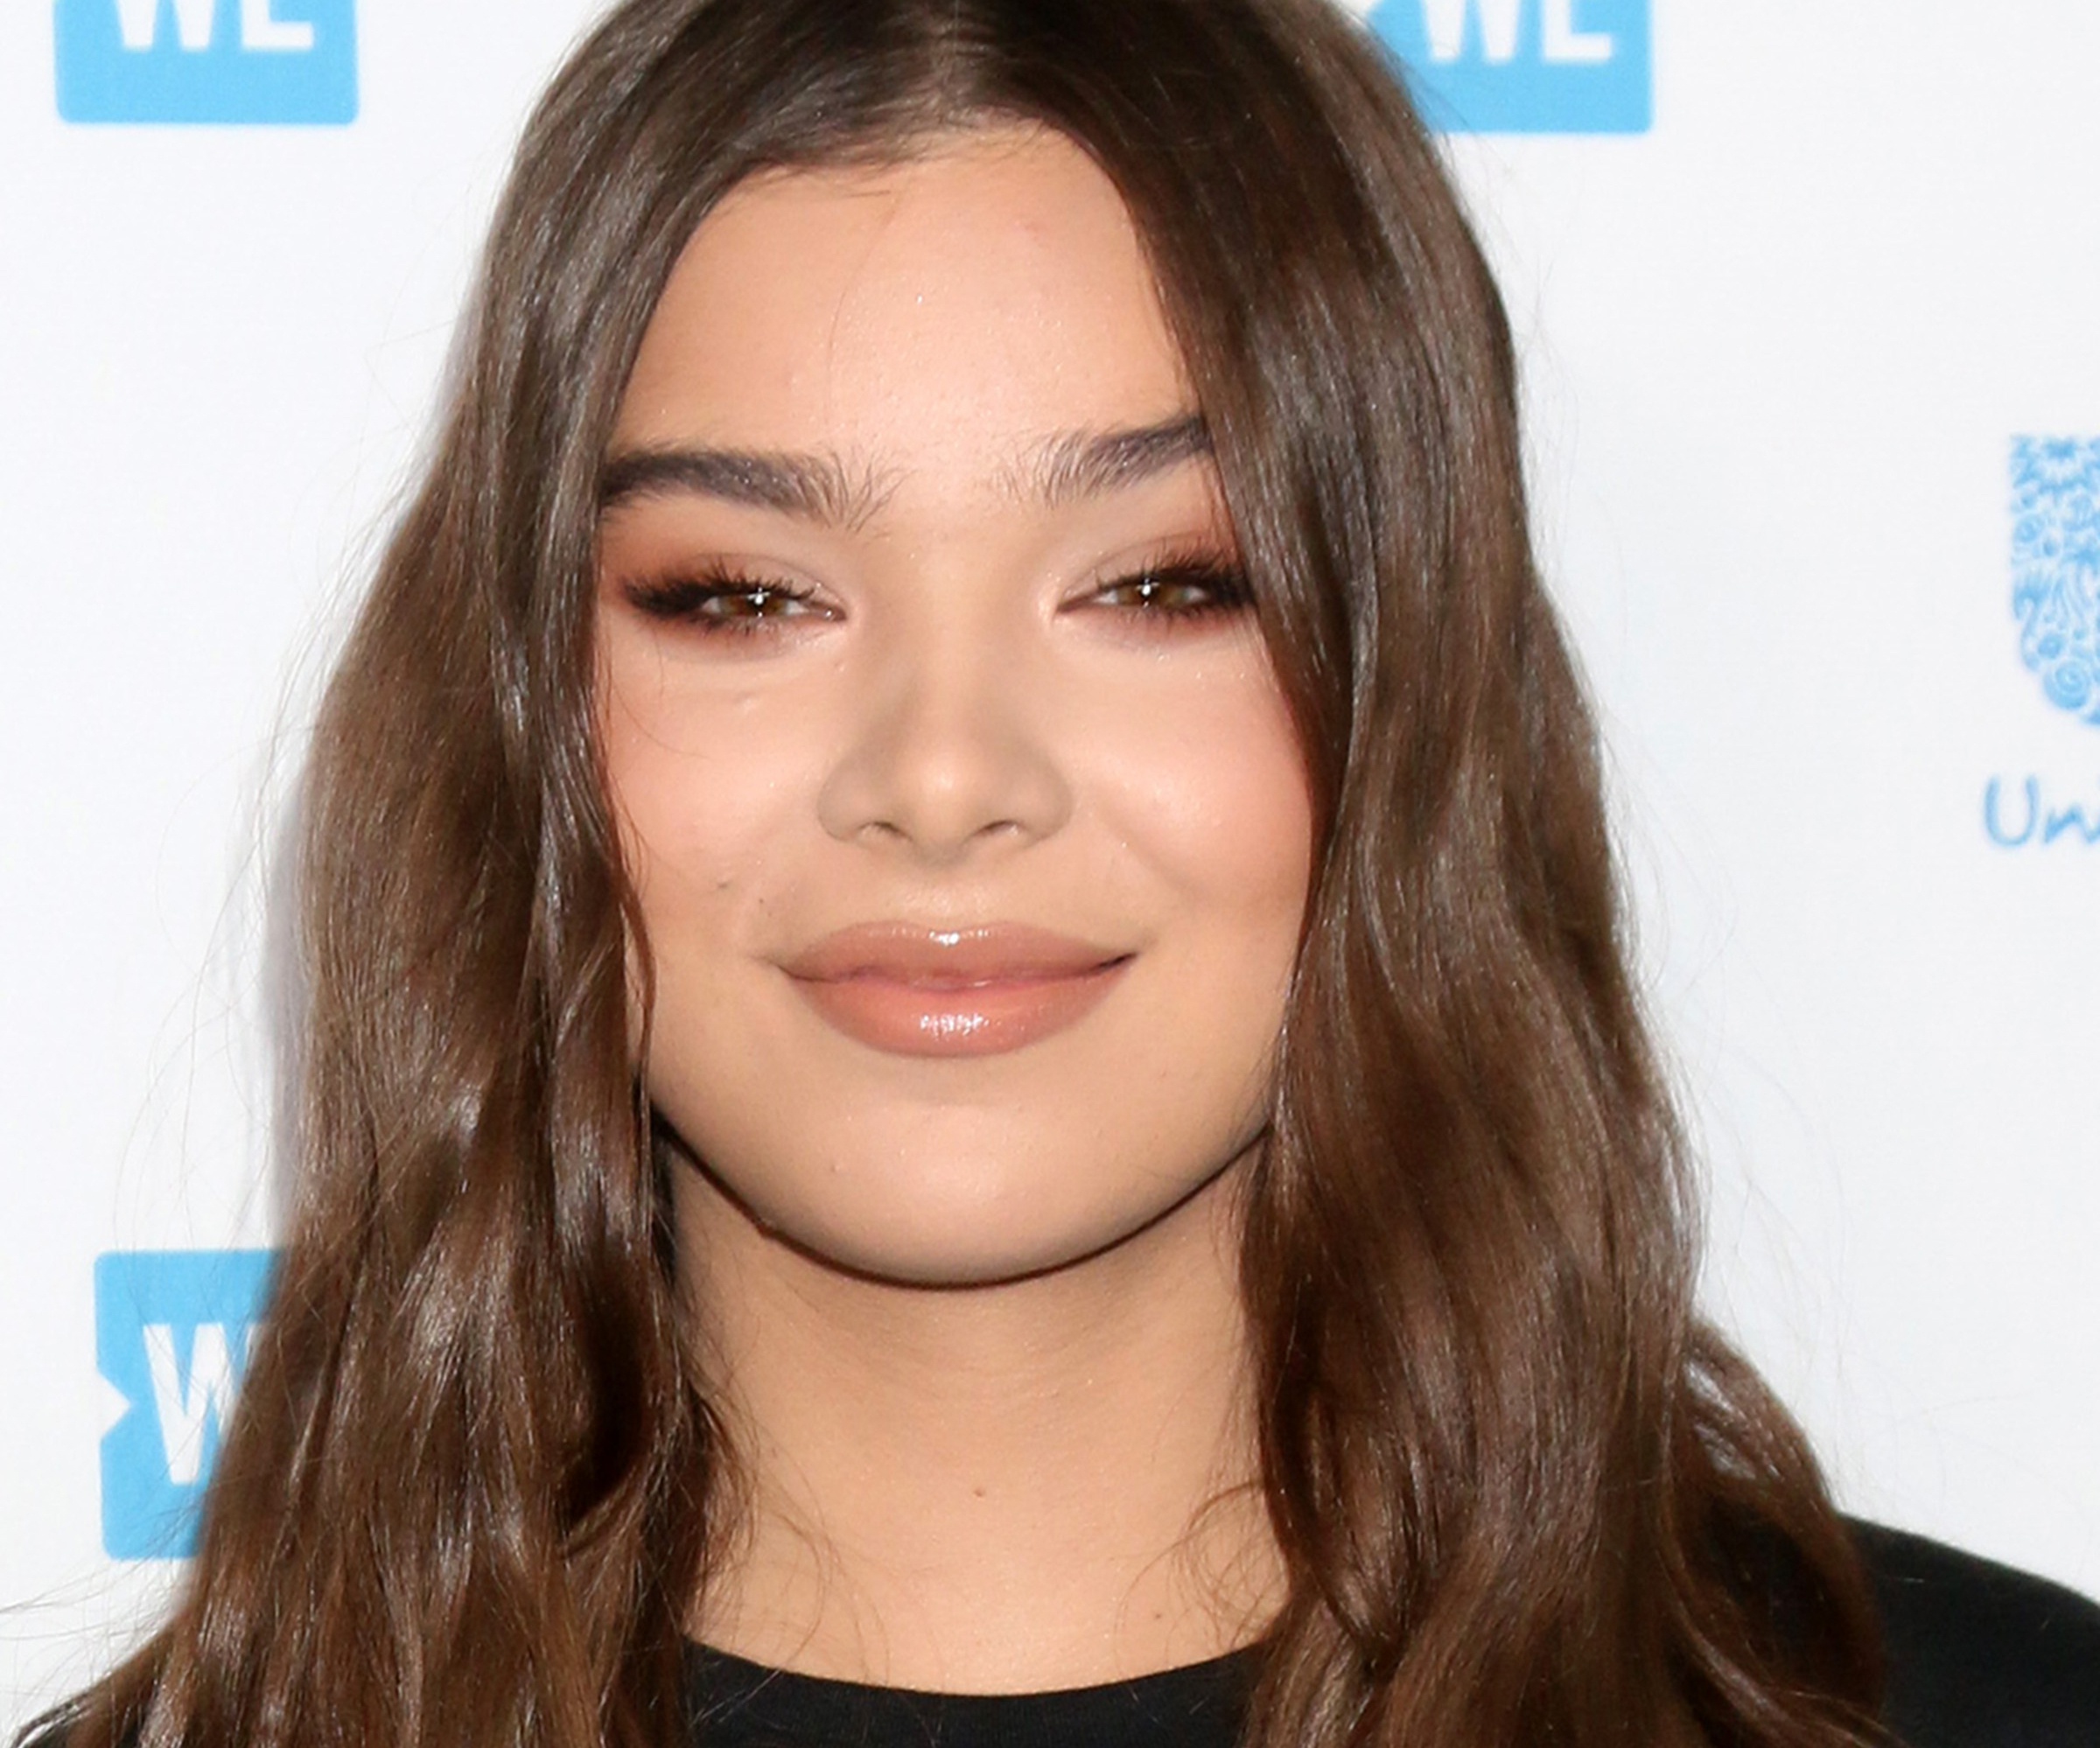 Hailee Steinfeld Says Good Actors Should Never Have All the Answers